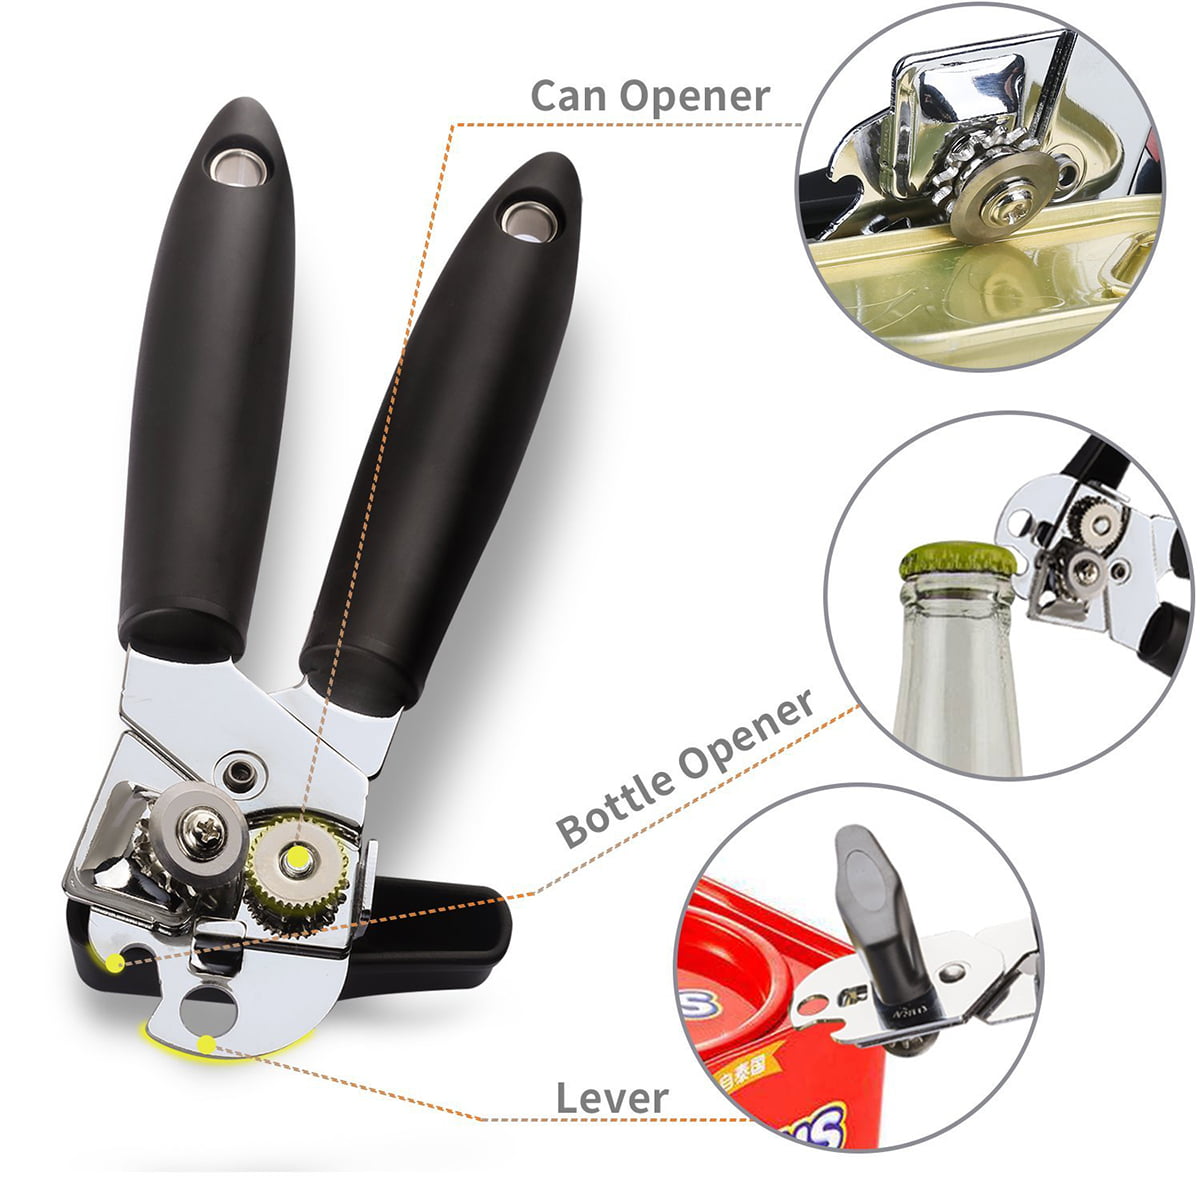 Pro Multifunction Stainless Steel Safety Side Cut Manual Can Tin Opener 2019